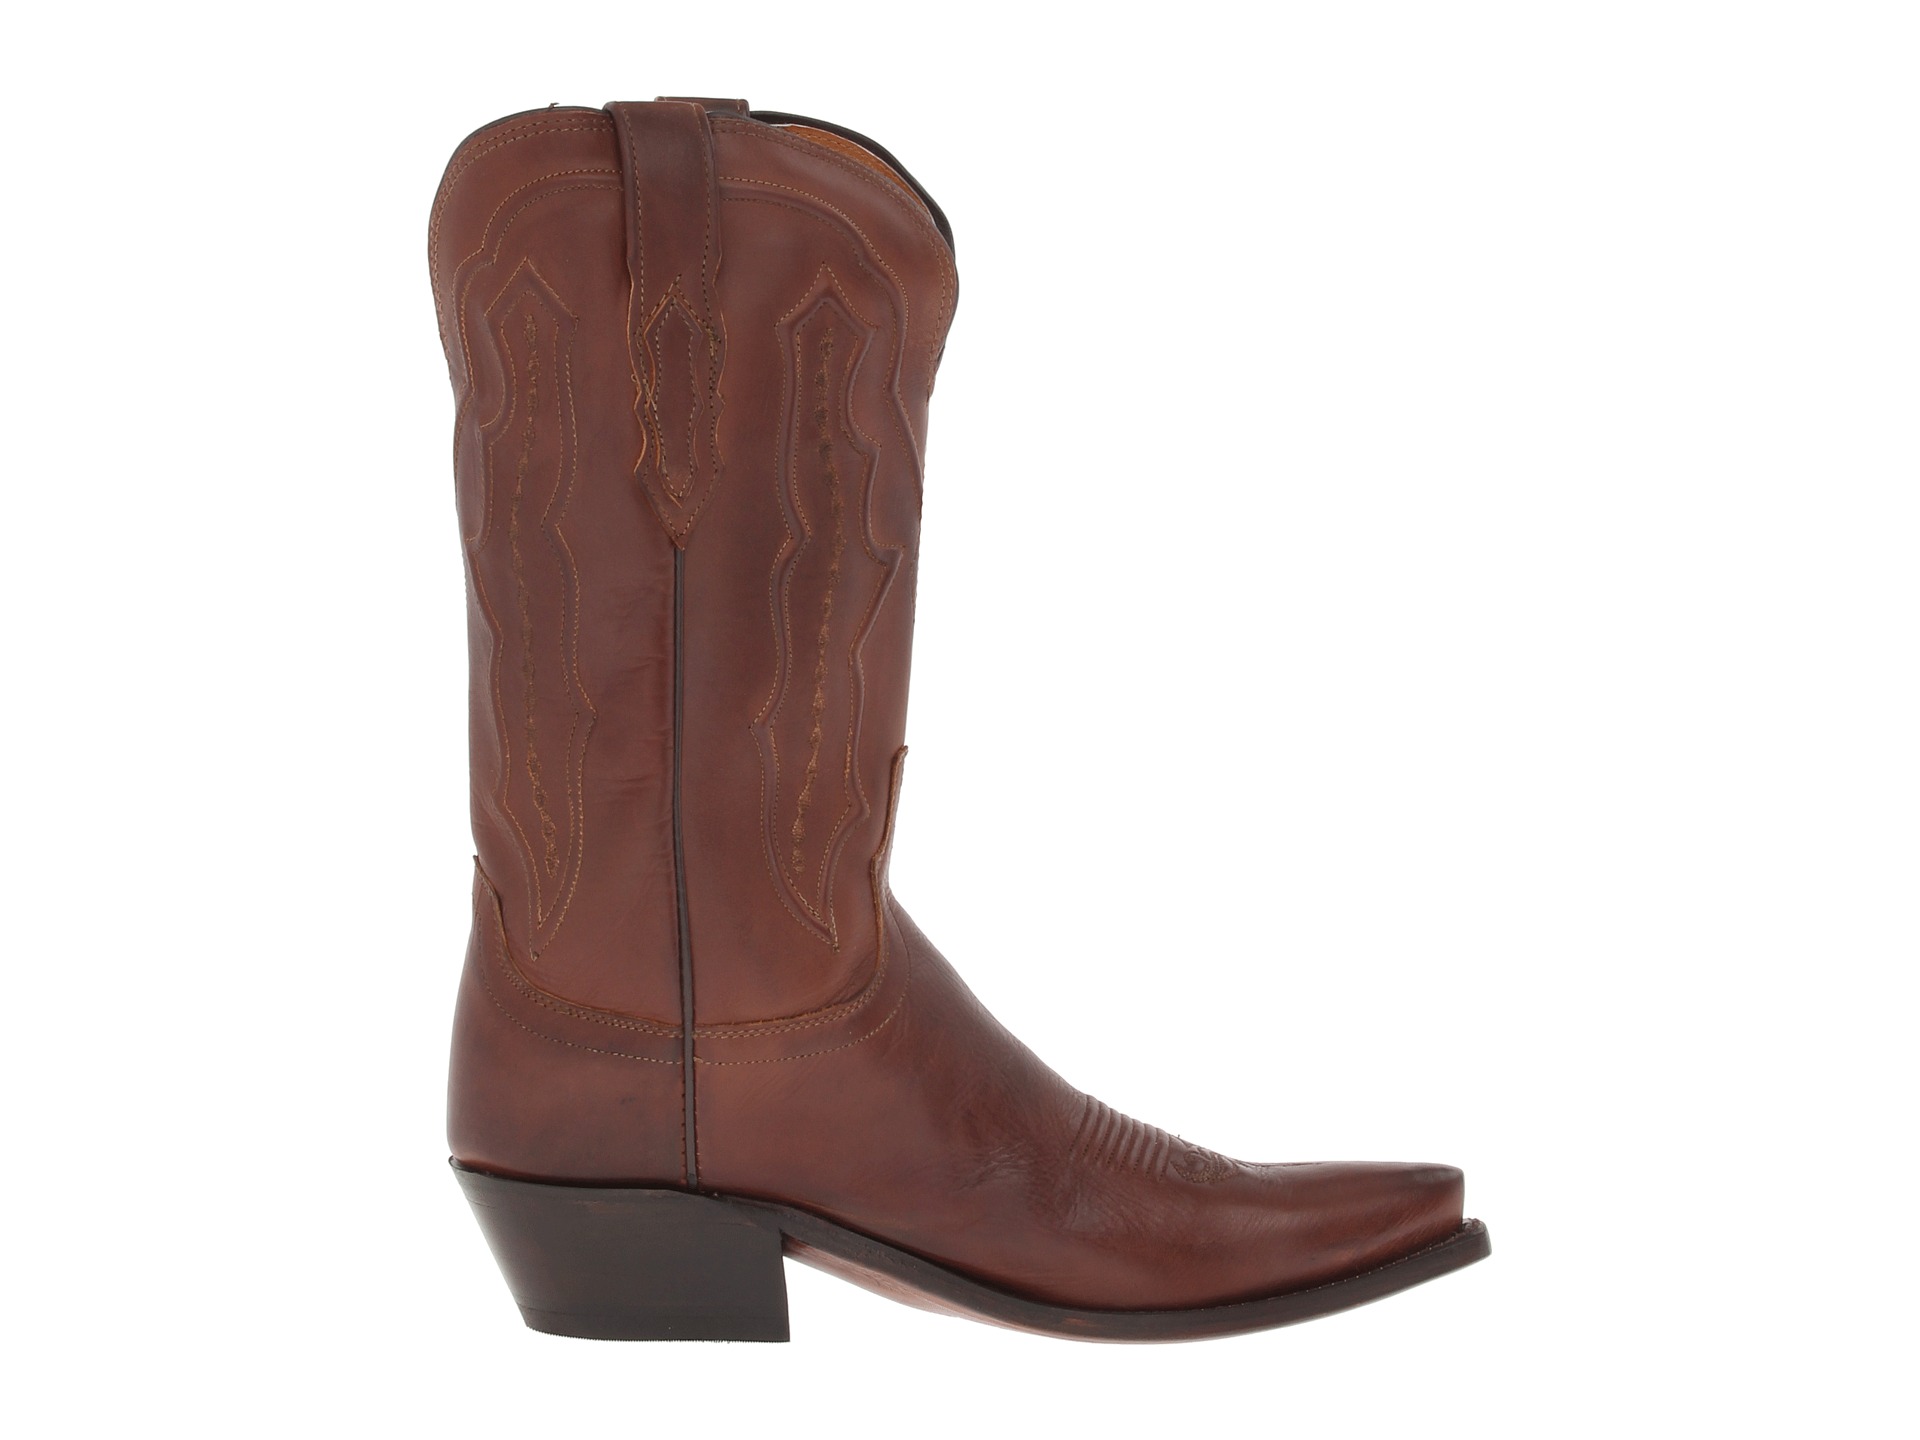 Lucchese M5004.S54 at Zappos.com